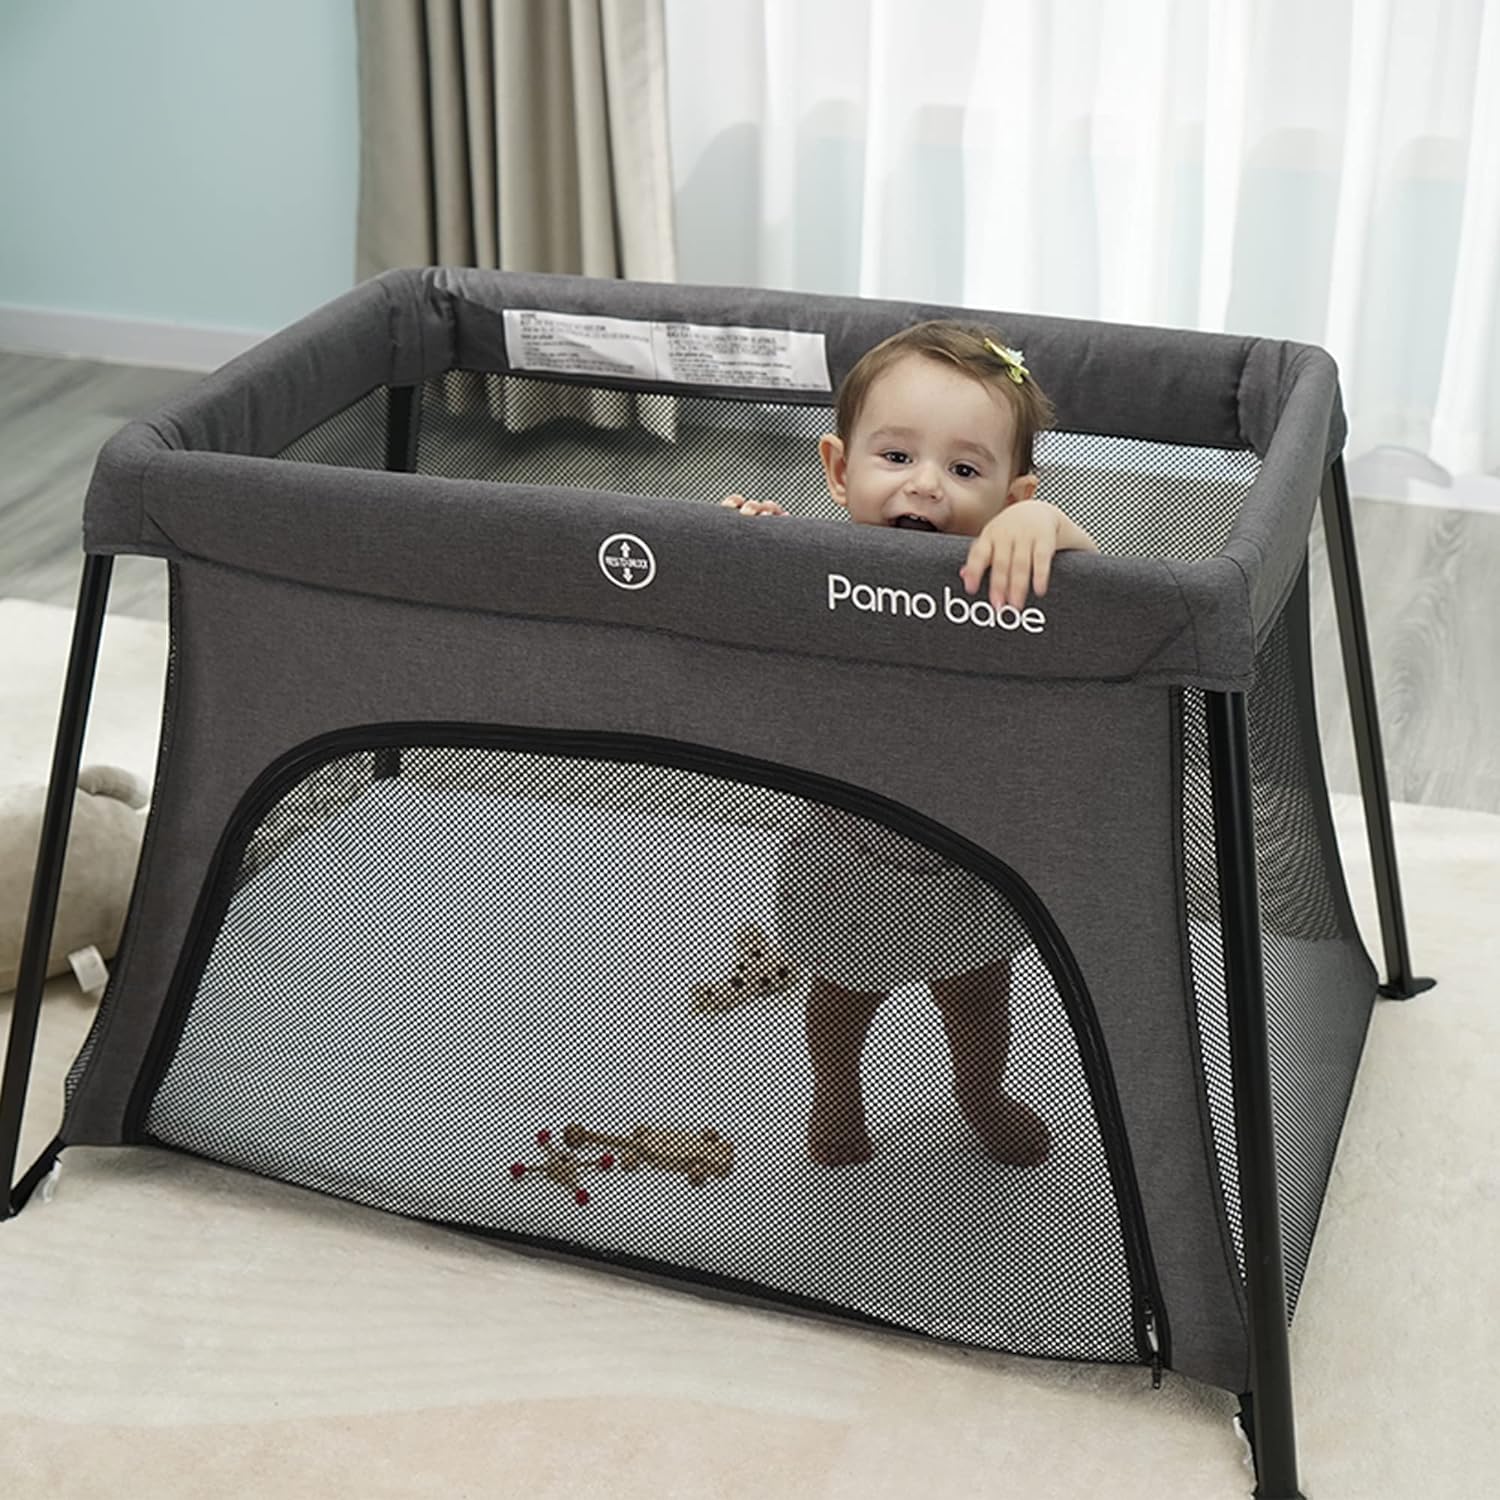 Pamo Babe Travel Foldable Portable Bassinet Baby Infant Comfortable Play  Yard Crib Cot with Soft Mattress, Breathable Mesh Walls, and Carry Bag, Gray